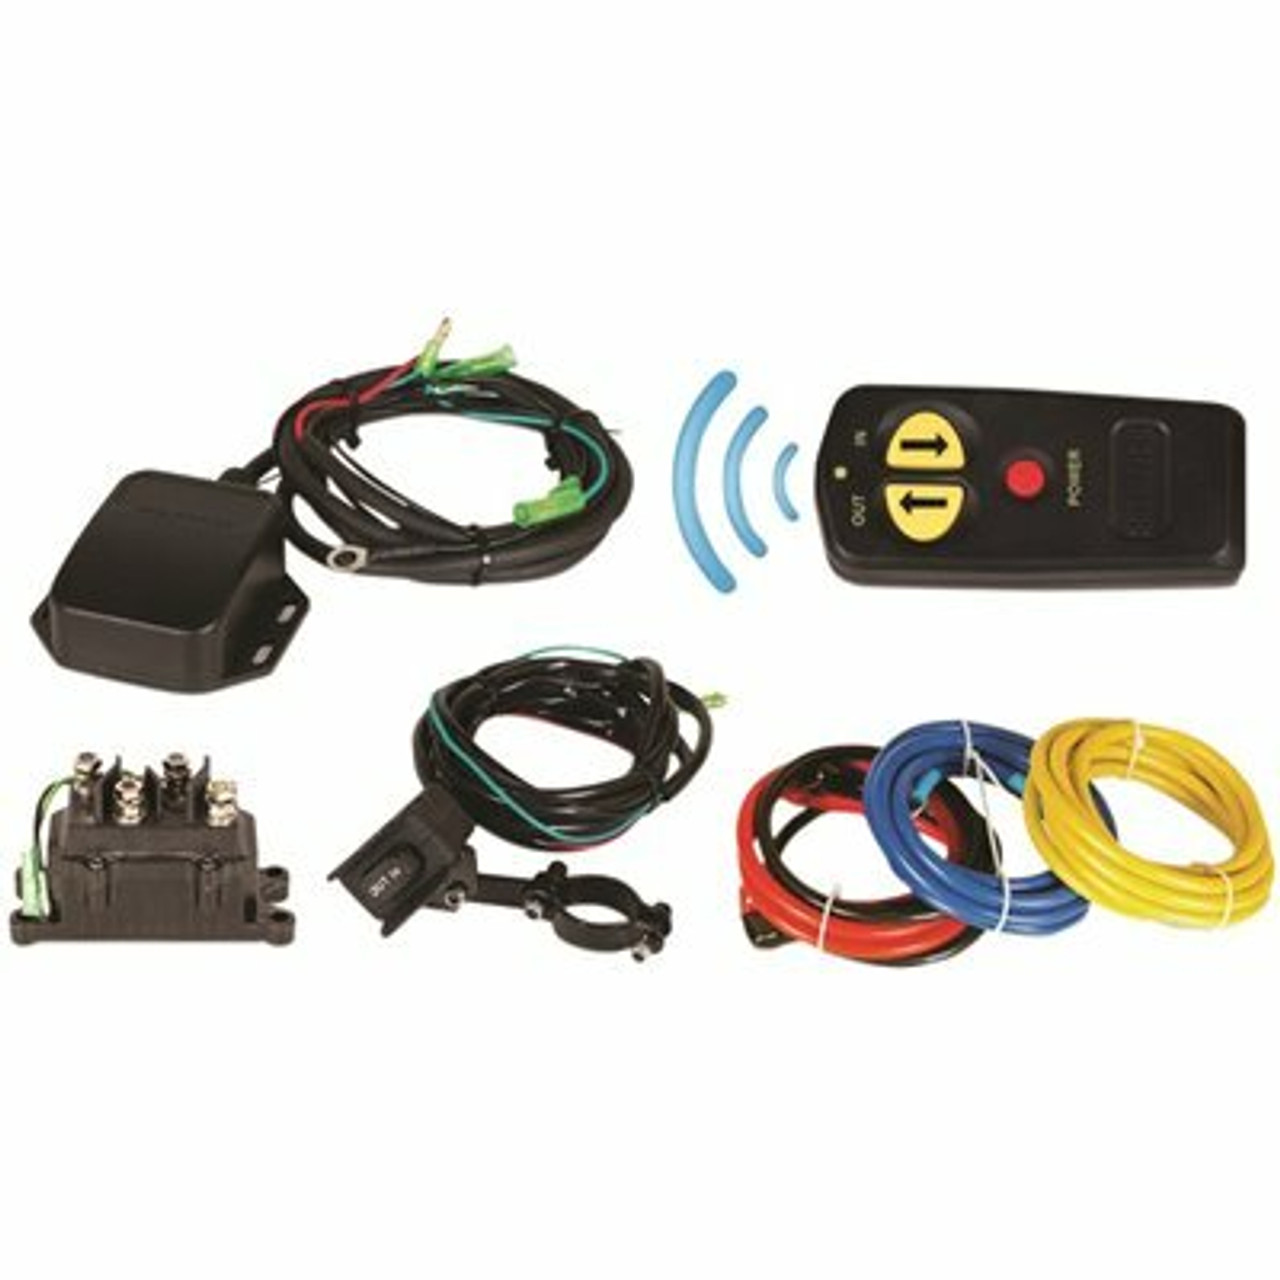 Champion Power Equipment Wireless Remote Winch Kit For 2,000 Lbs. - 4,700 Lbs. Champion Winches